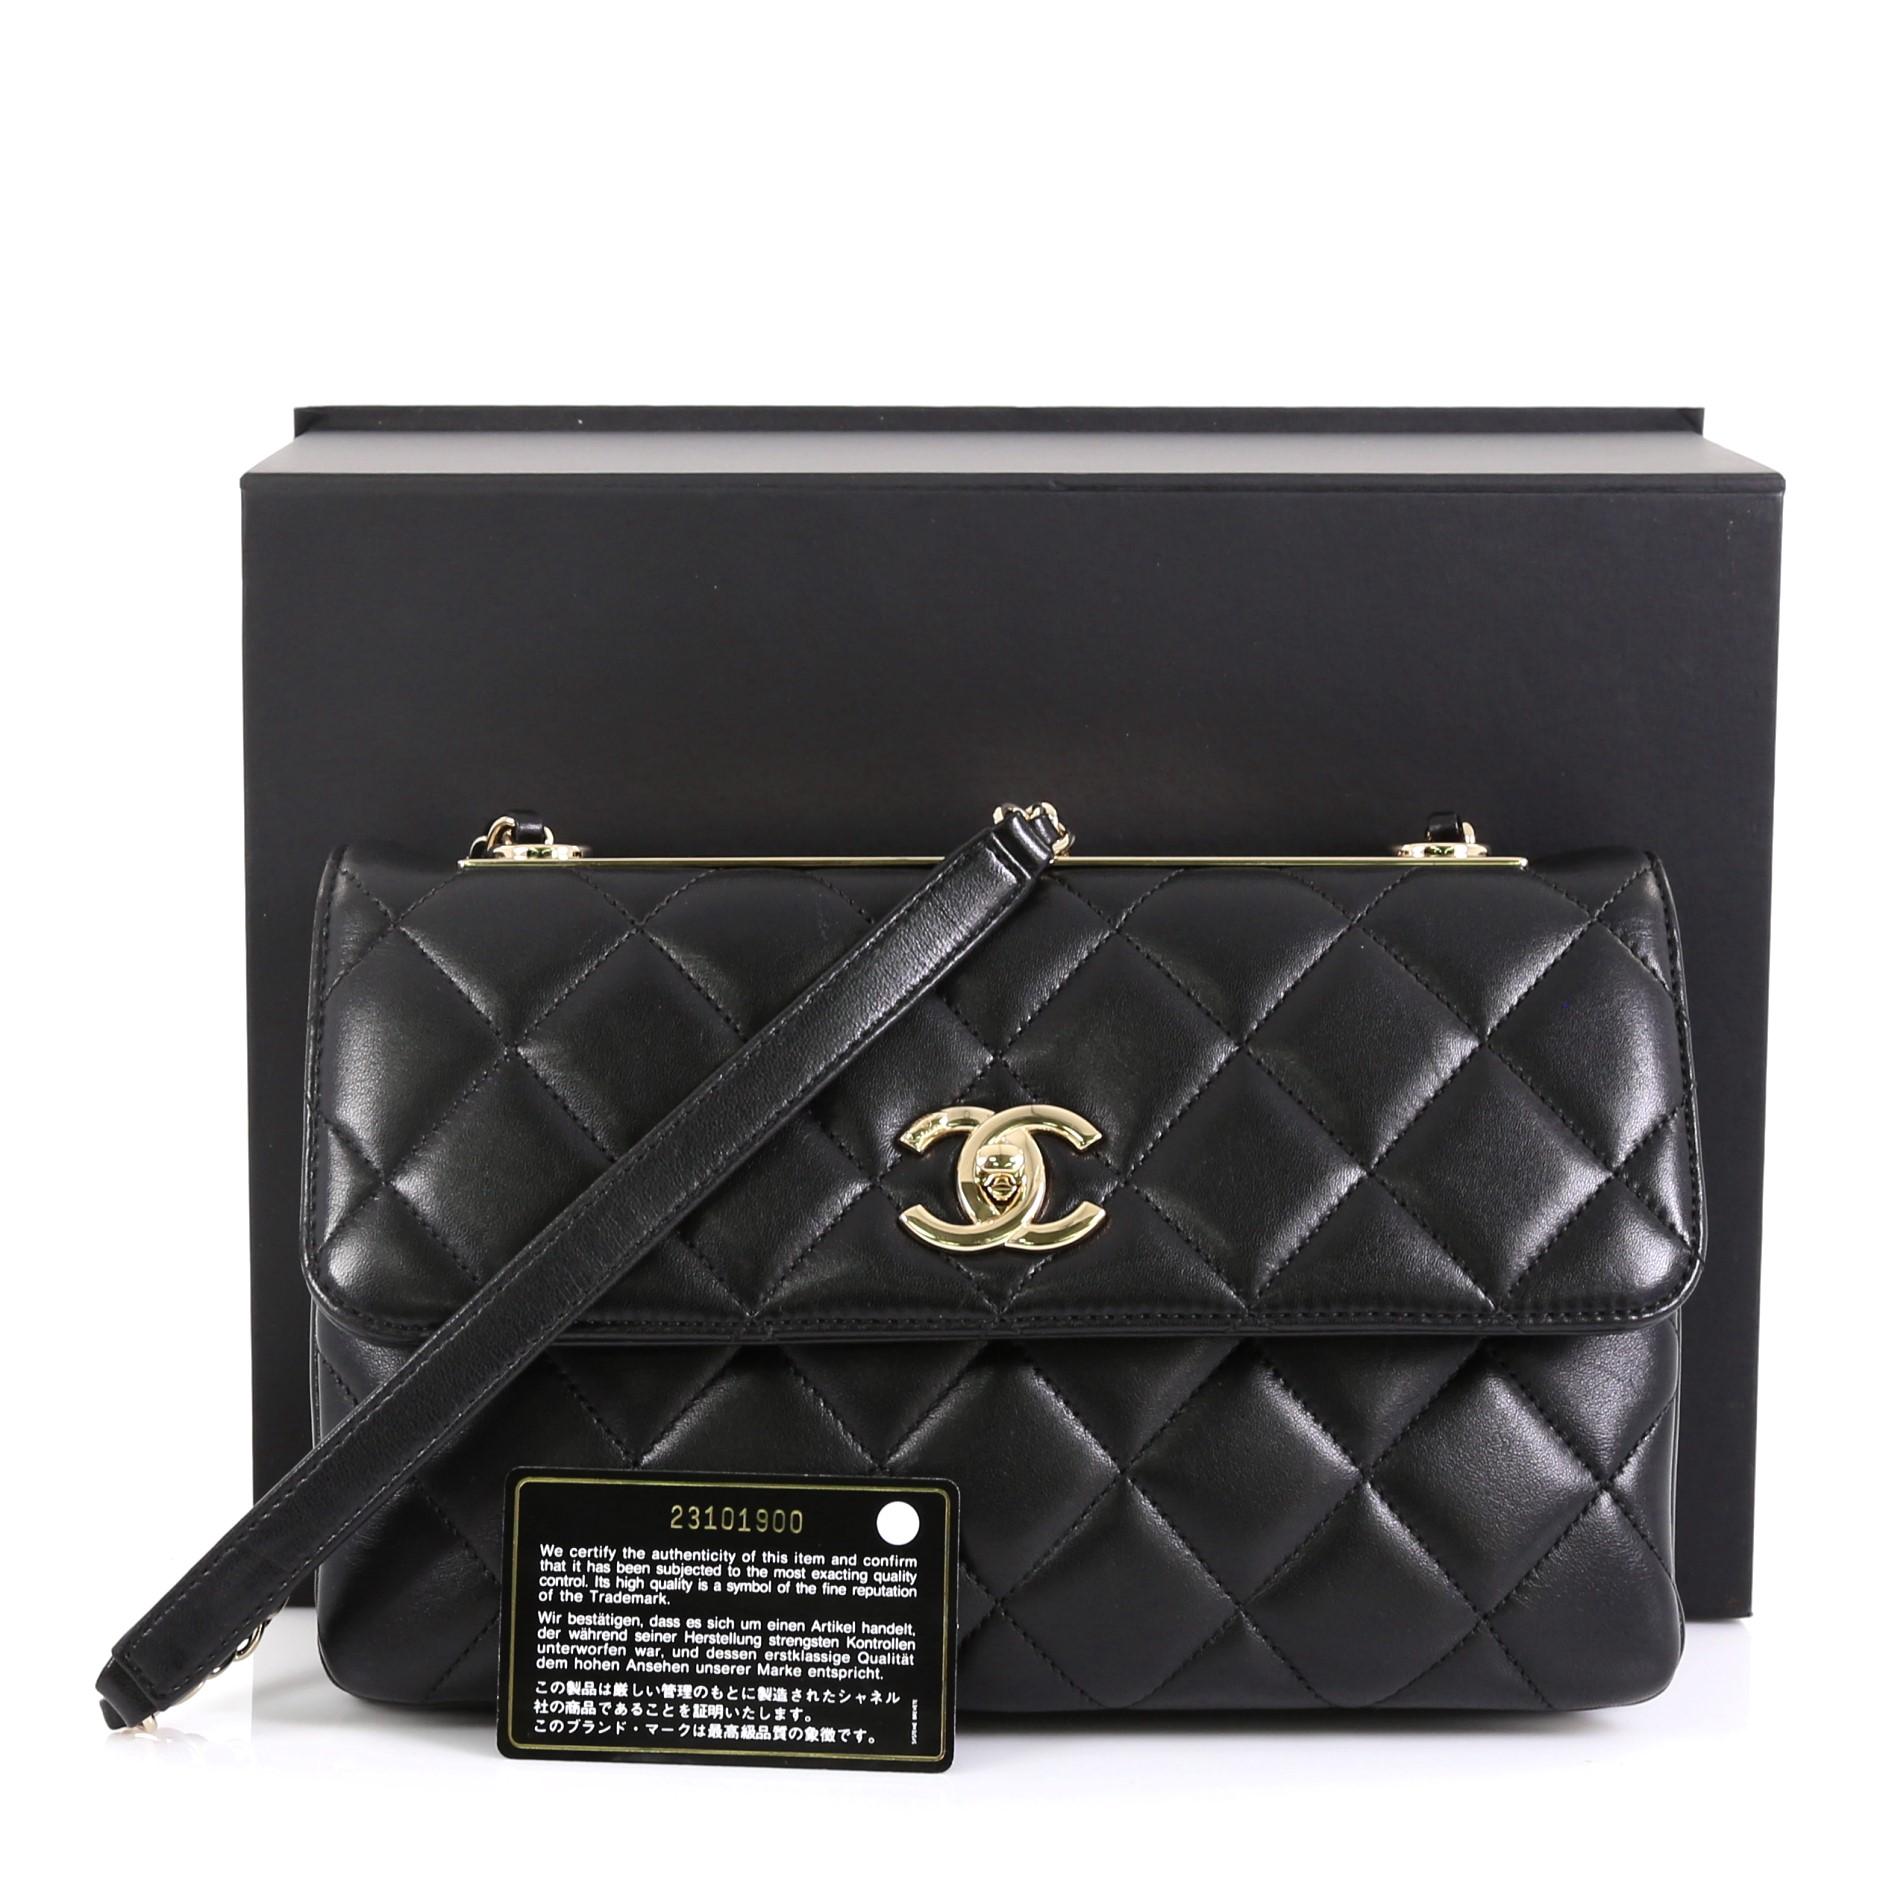 This Chanel Trendy CC Flap Bag Quilted Lambskin Medium, crafted from quilted black lambskin leather, features woven-in leather chain strap with leather shoulder pad, Chanel gold-tone nameplate on top, exterior flat back pocket, and gold-tone